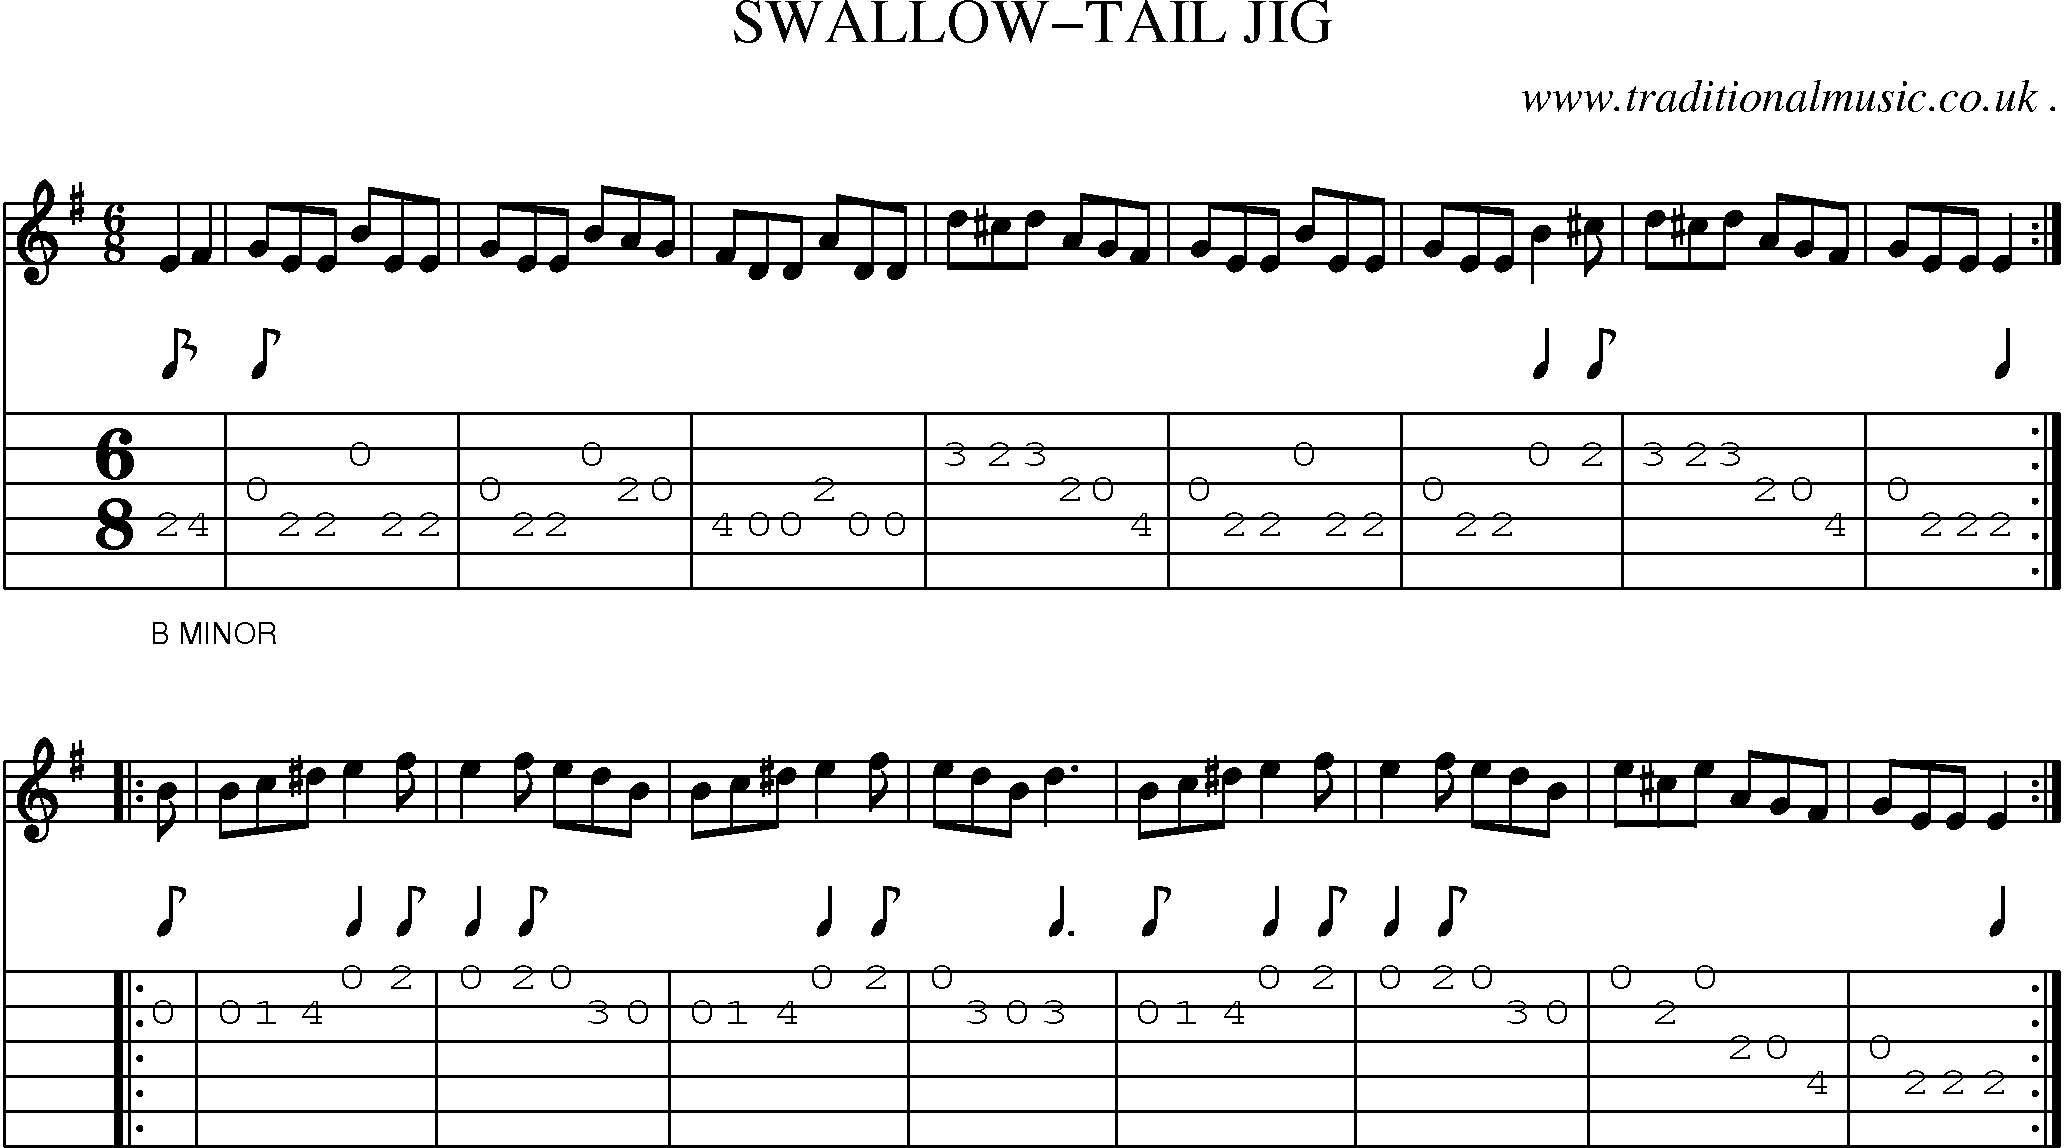 Sheet-Music and Guitar Tabs for Swallow-tail Jig